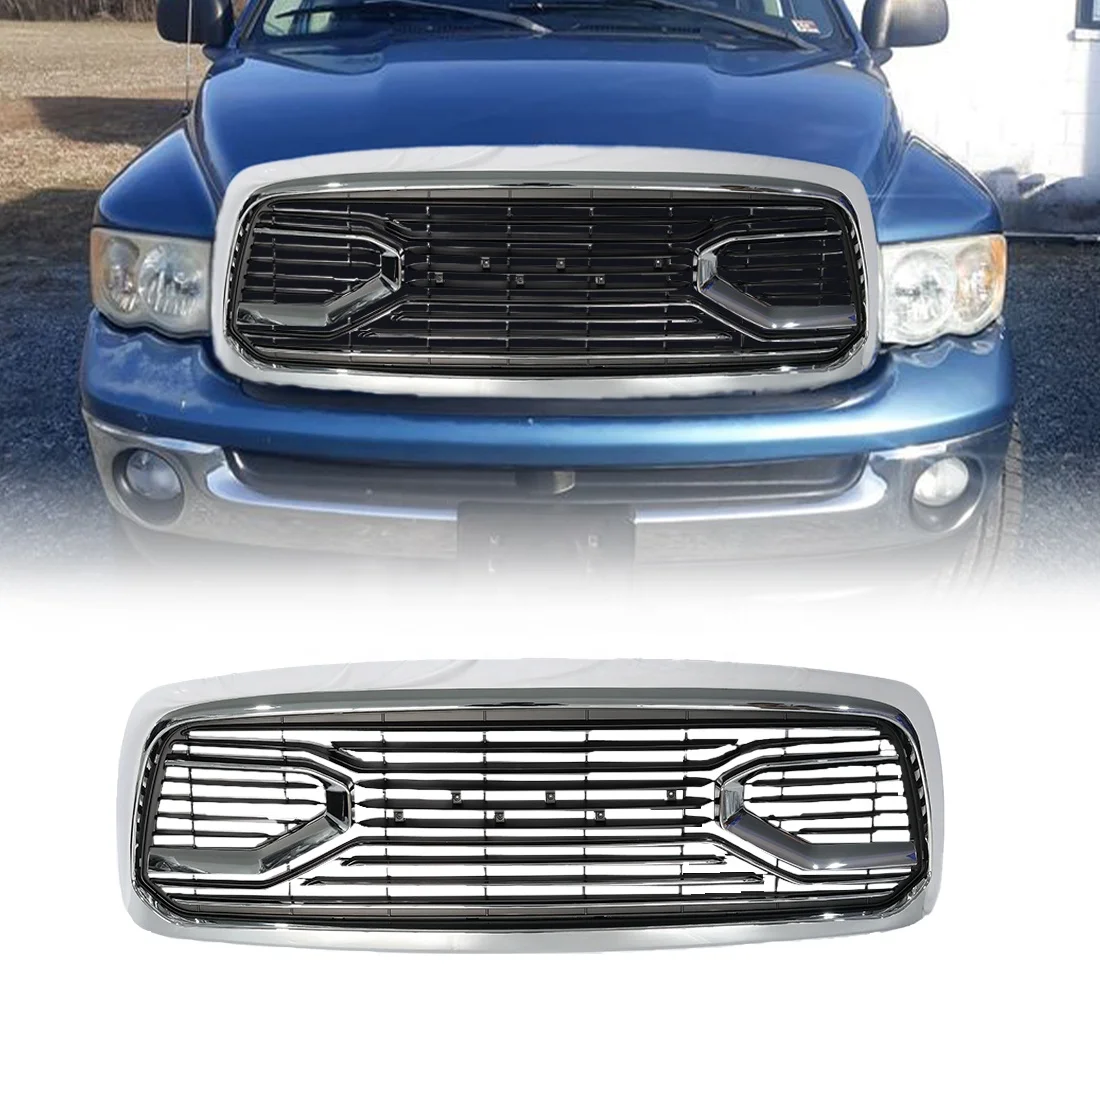 

Car Grills Big Horn Style Front Grille Chrome Grill With Amber Lights For 2002-2005 Dodge Ram 1500 ABS